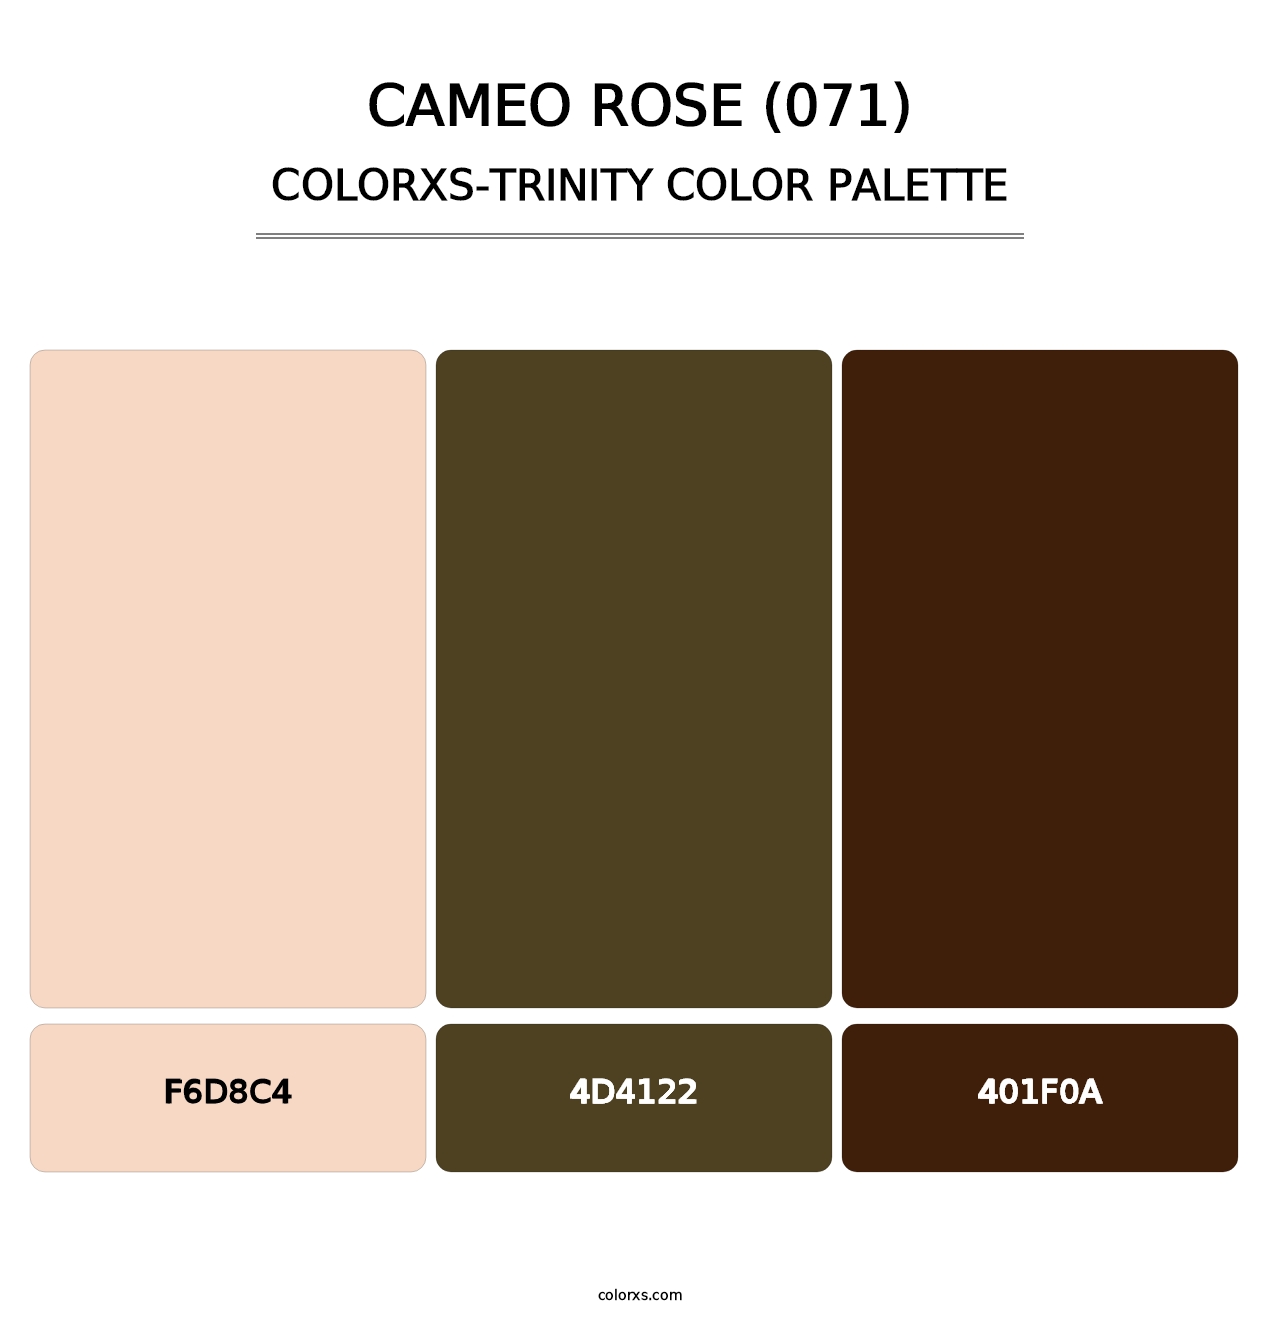 Cameo Rose (071) - Colorxs Trinity Palette